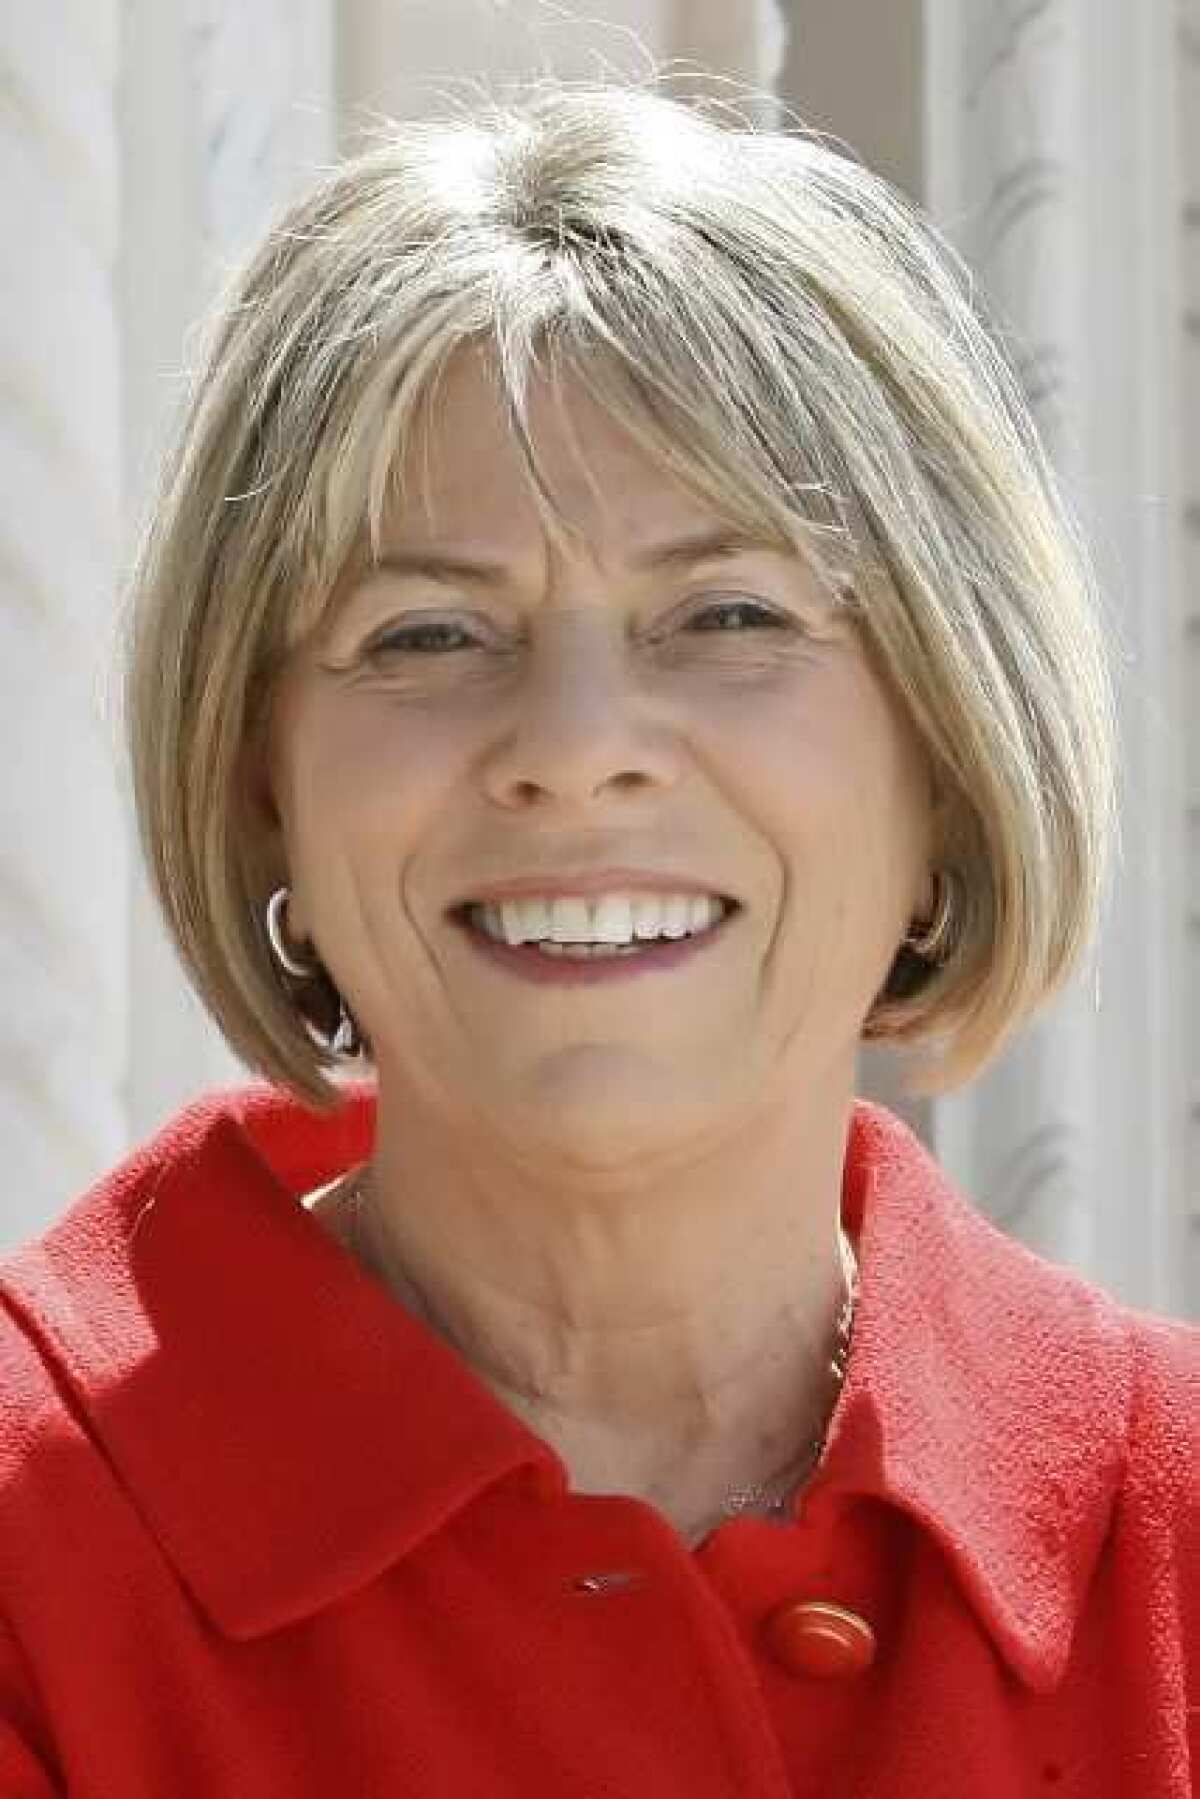 Ann Ransford, Glendale Community College trustee, will be sworn in as a member of the California Community College Trustees board of directors at a meeting in Sacramento in June.